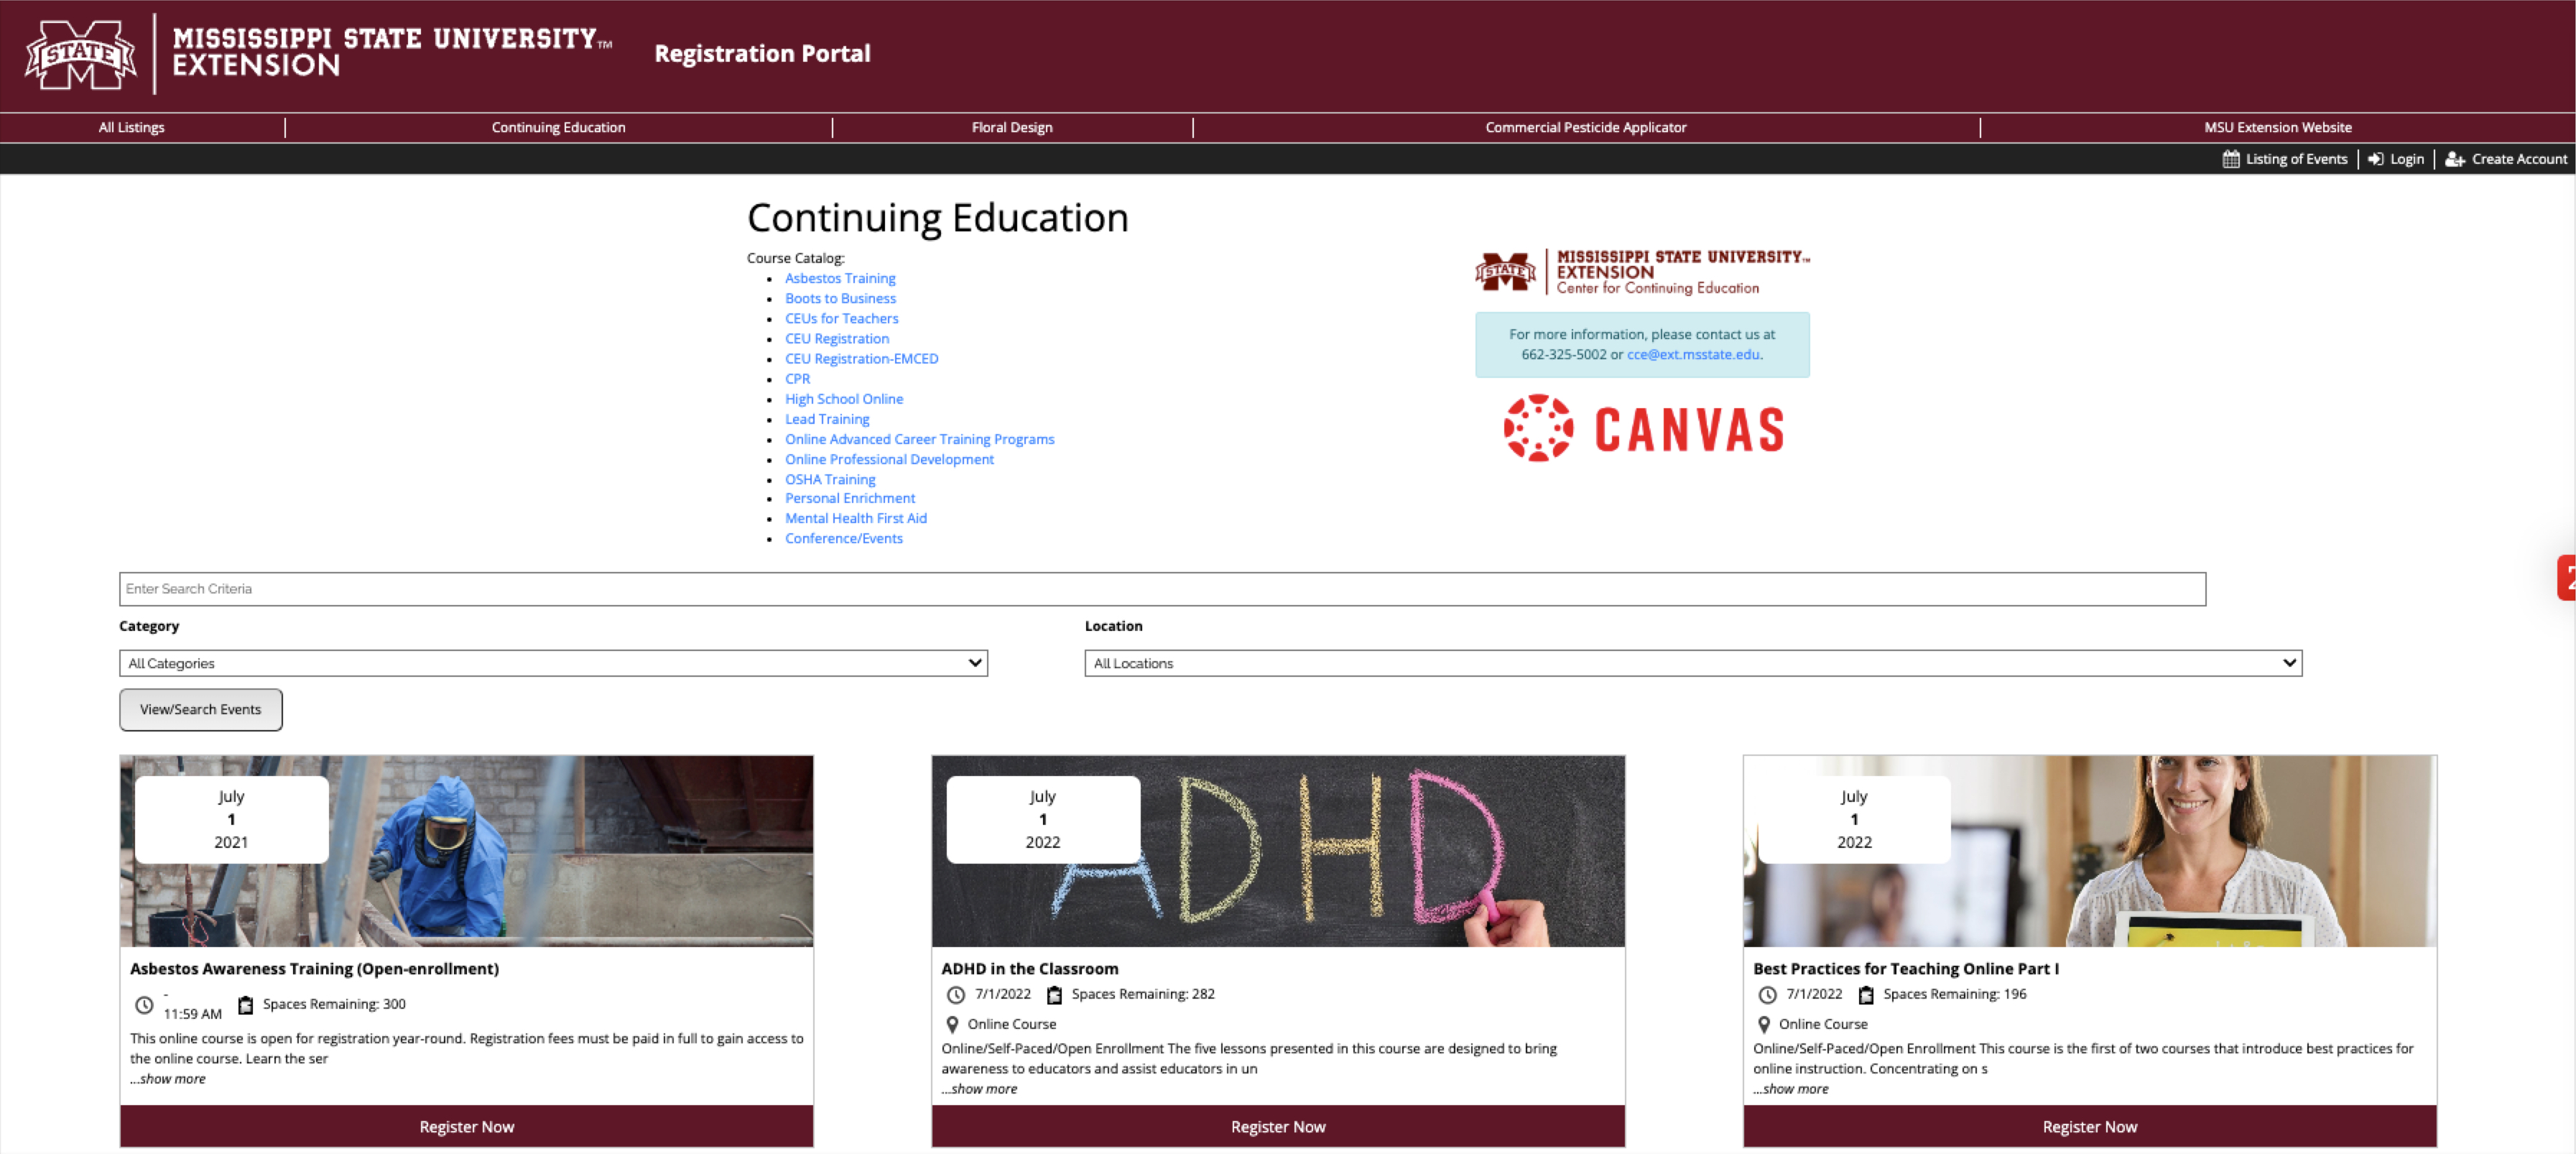 Continuing education tracking, testing, issuing certificates of completion tracking, and payment integration. Integration with Canvas and Blackboard.